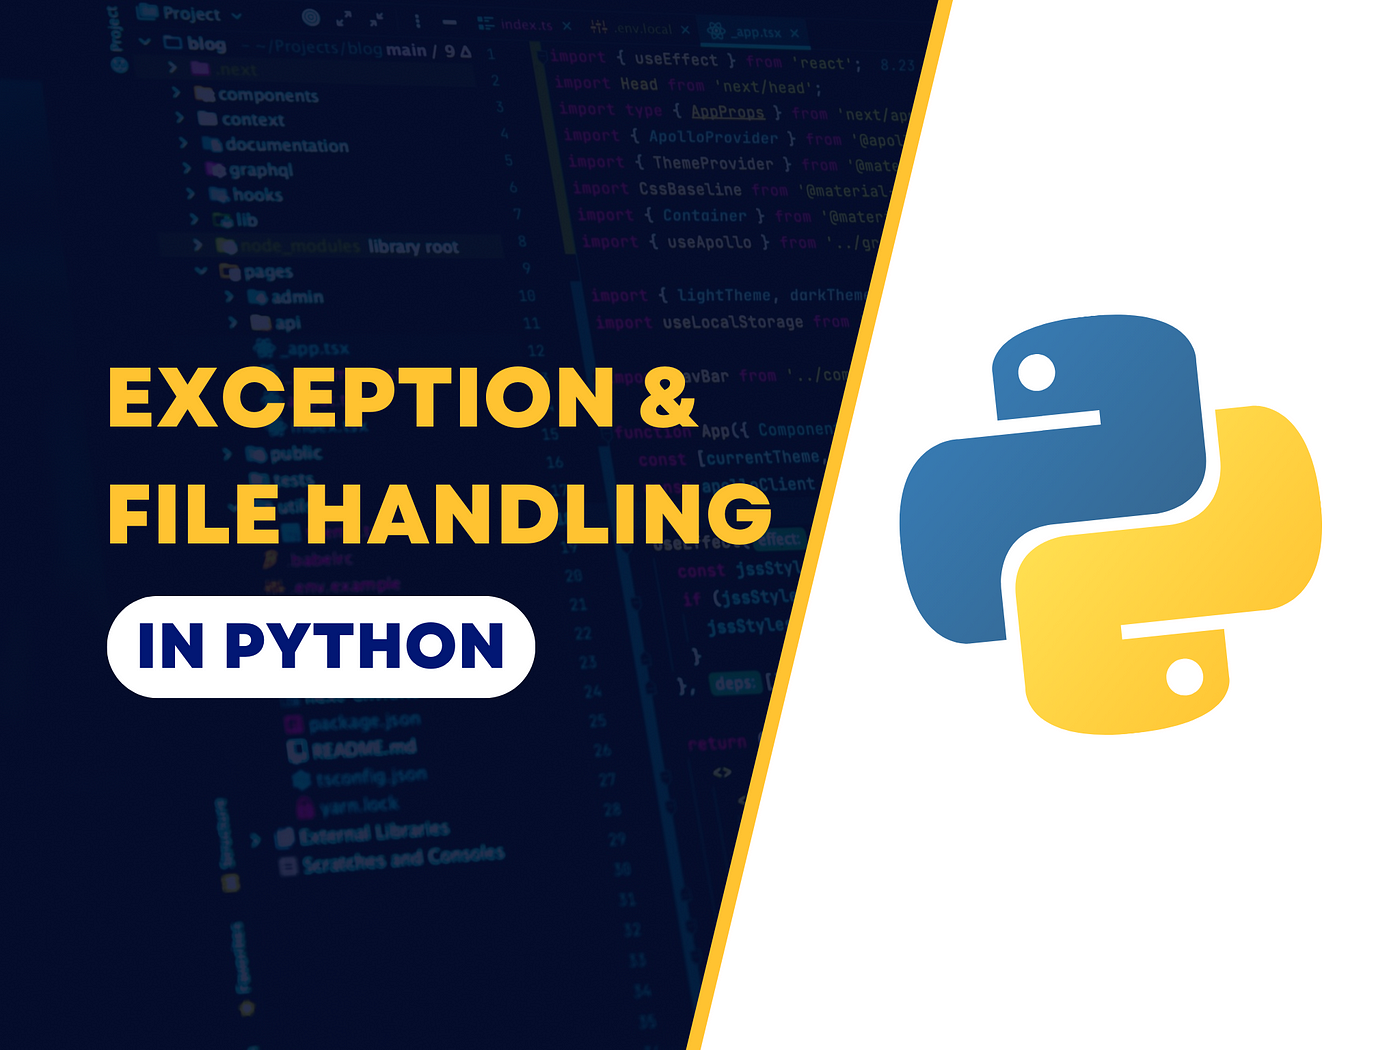 Exception and File Handling in Python, by preciousvictory